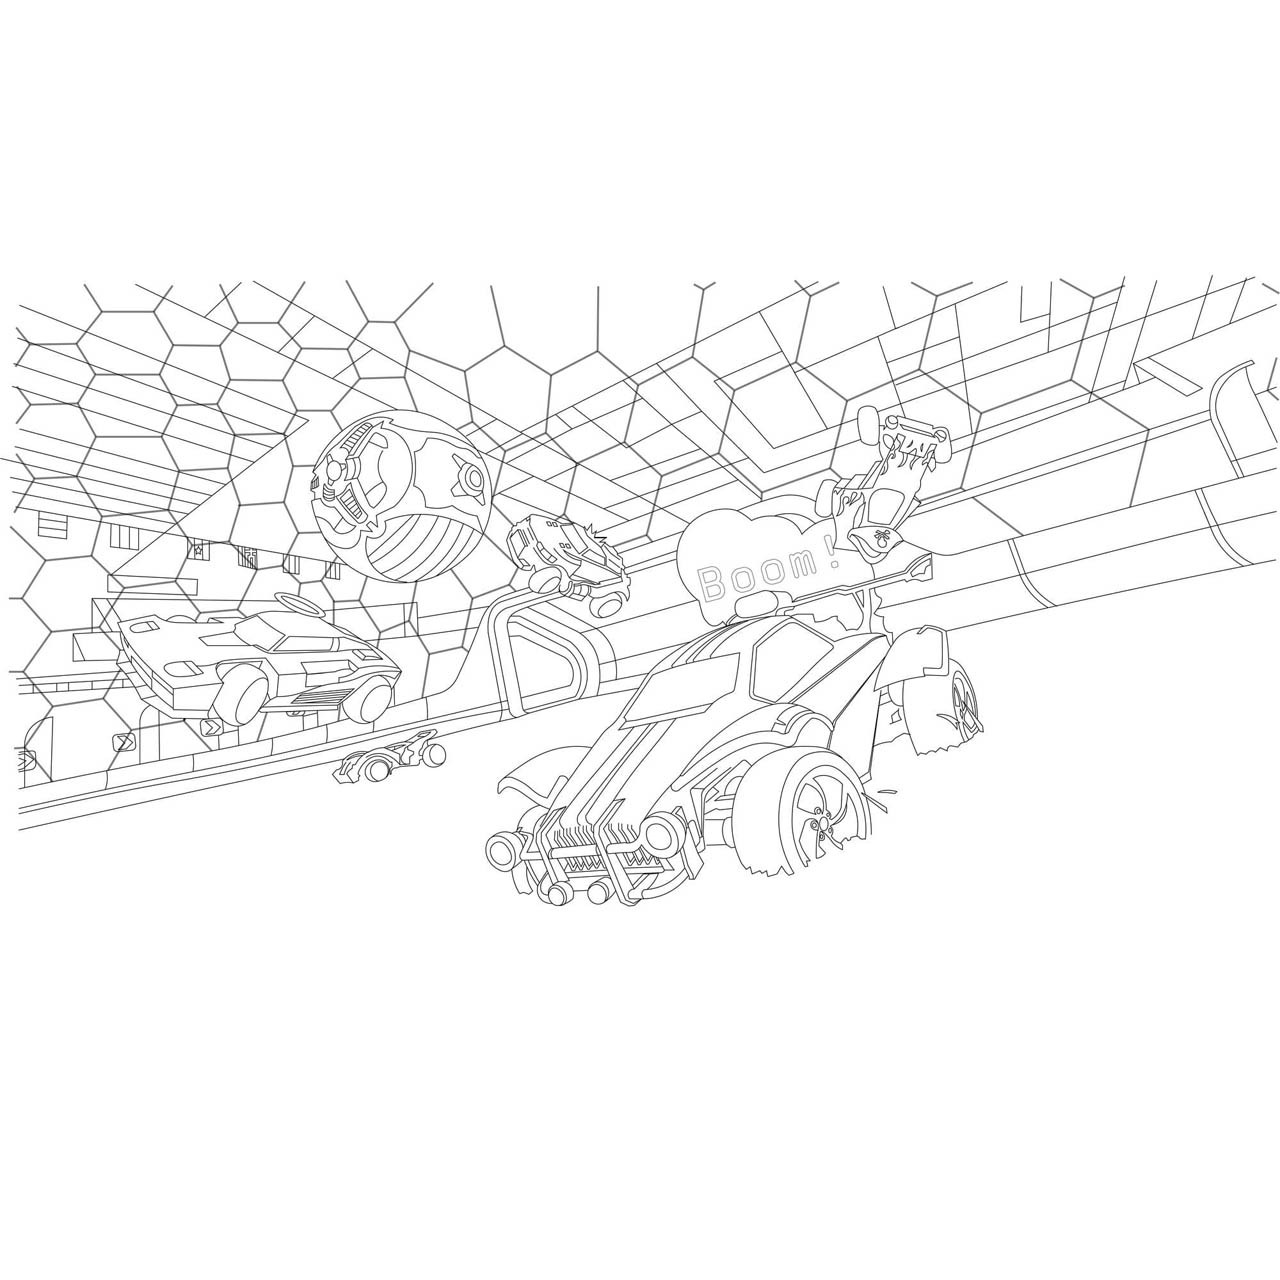 Free Rocket League Coloring Pages Cars with Ball printable